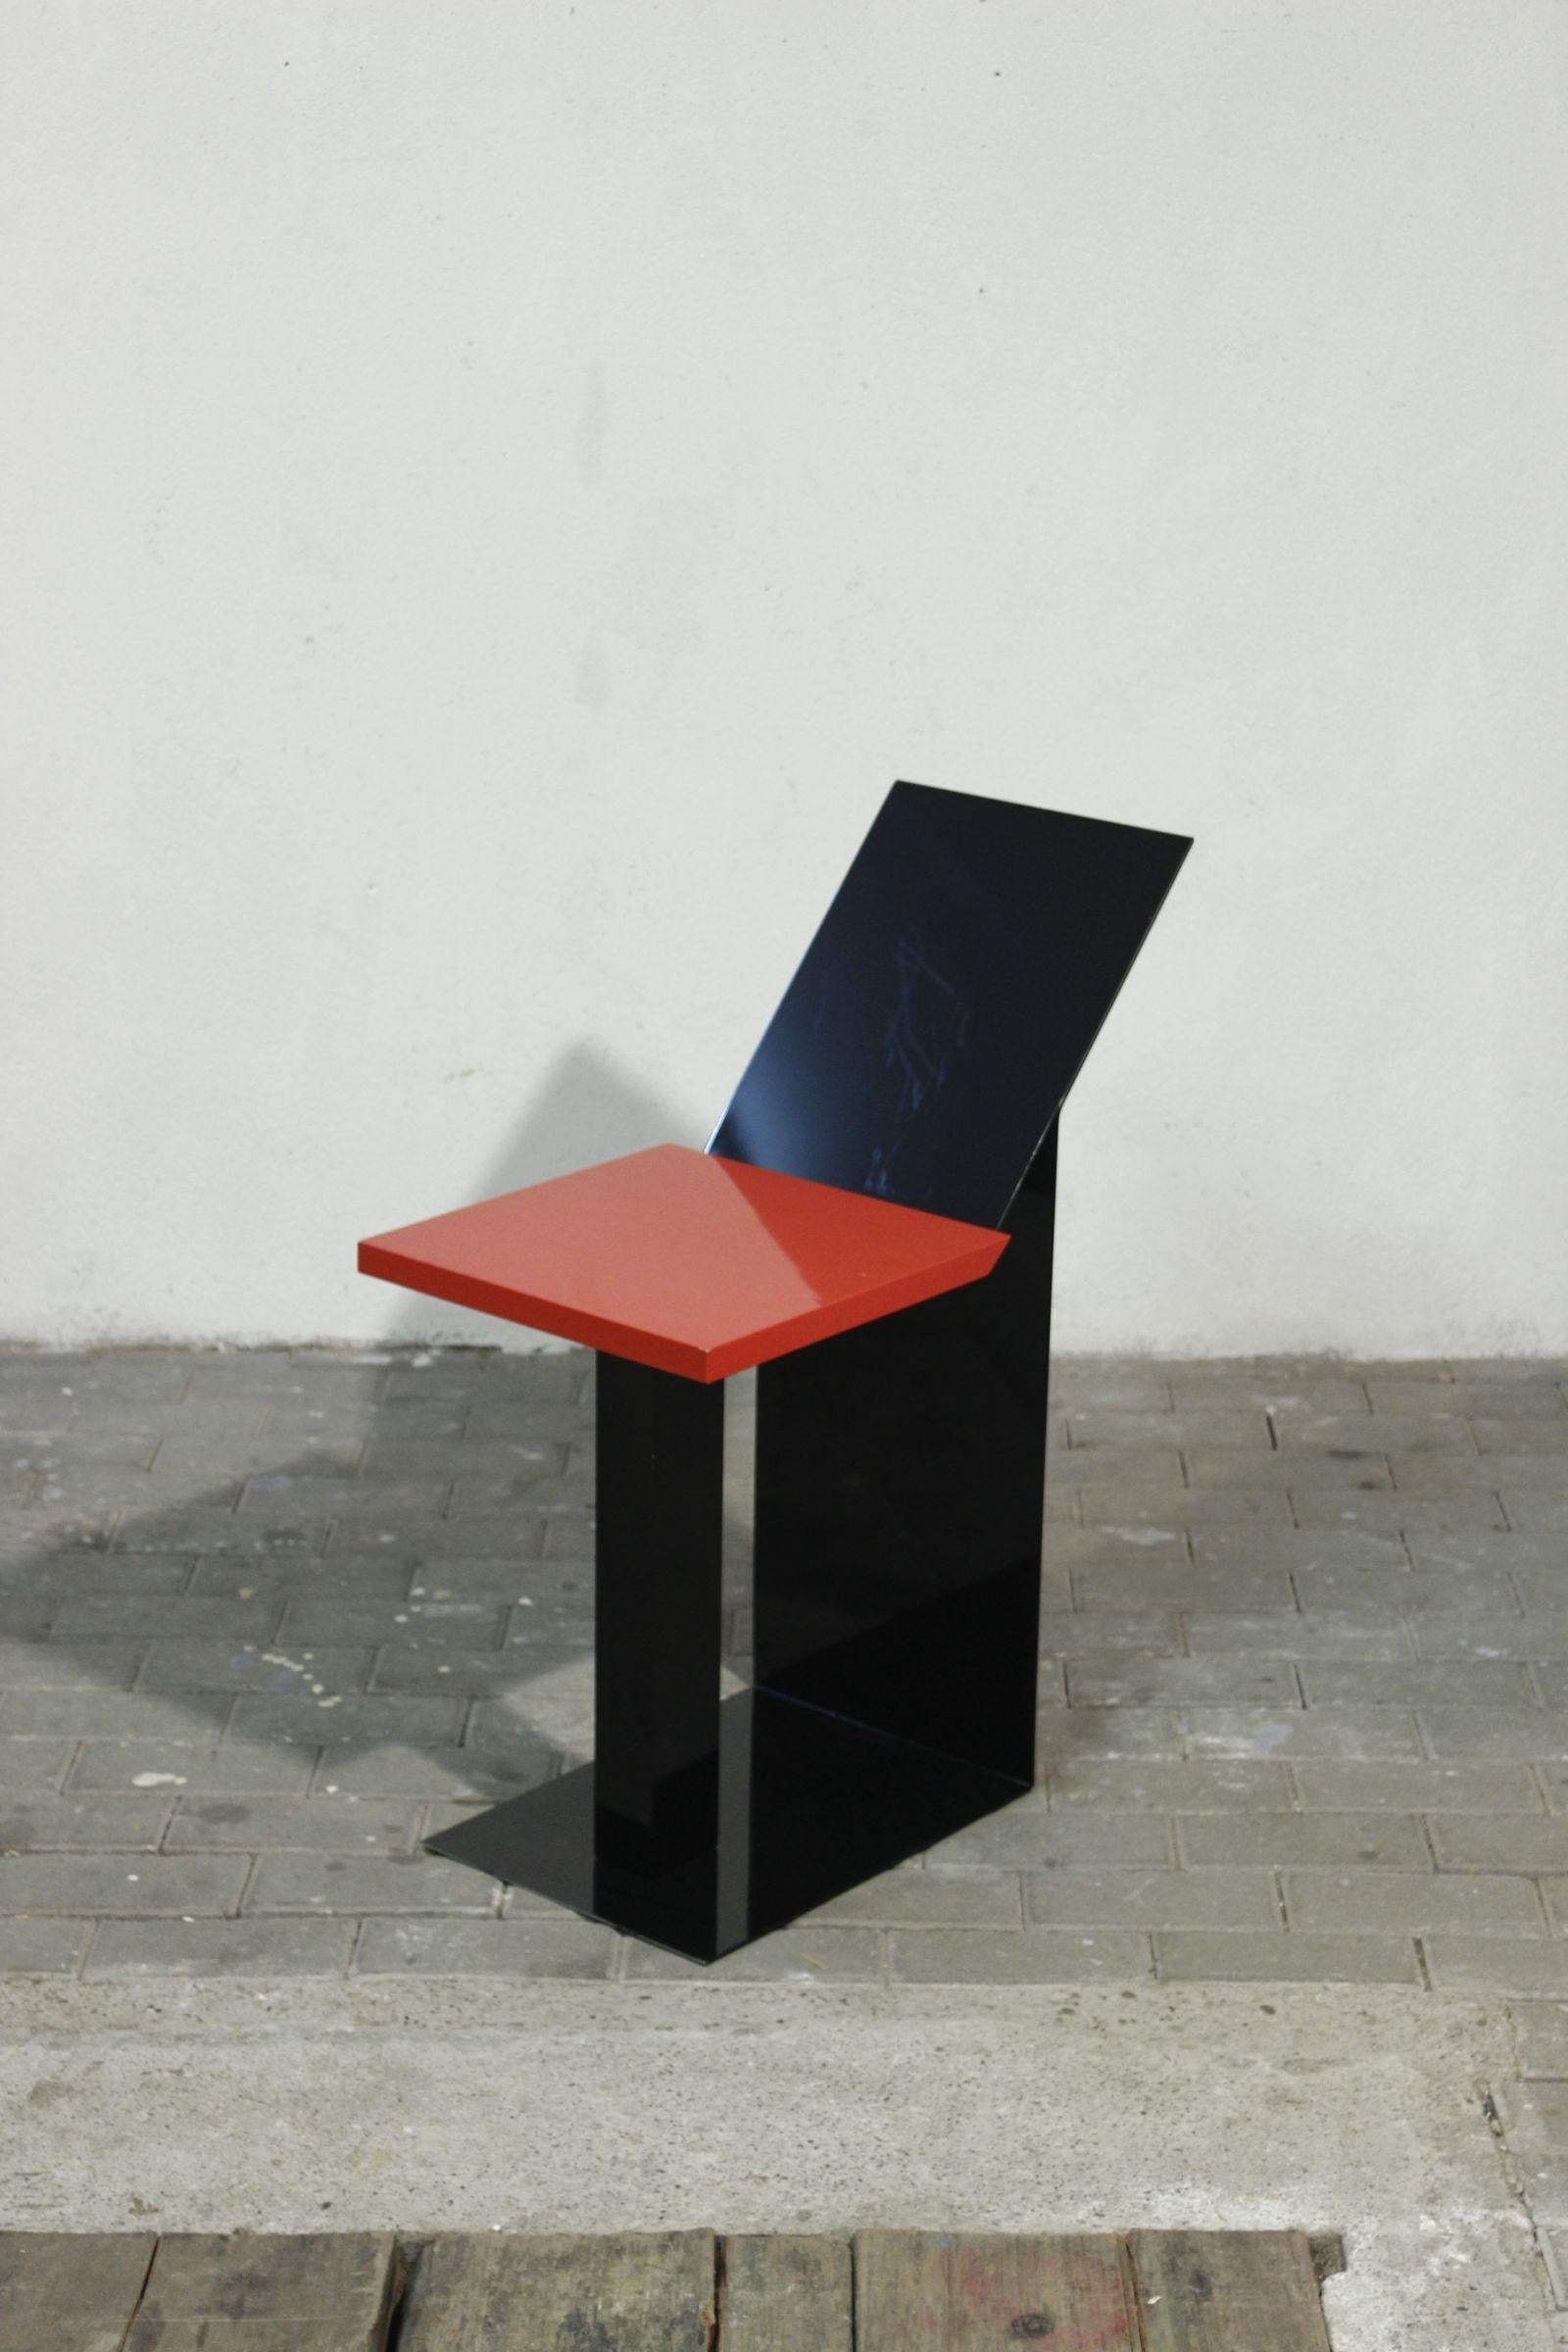 Original side table or pedestal in a radical postmodernist design, composed of black-painted folded sheet metal and red-lacquered particleboard.

Its dimensions make it ideal as a sofa end or pedestal table, although its design is reminiscent of a